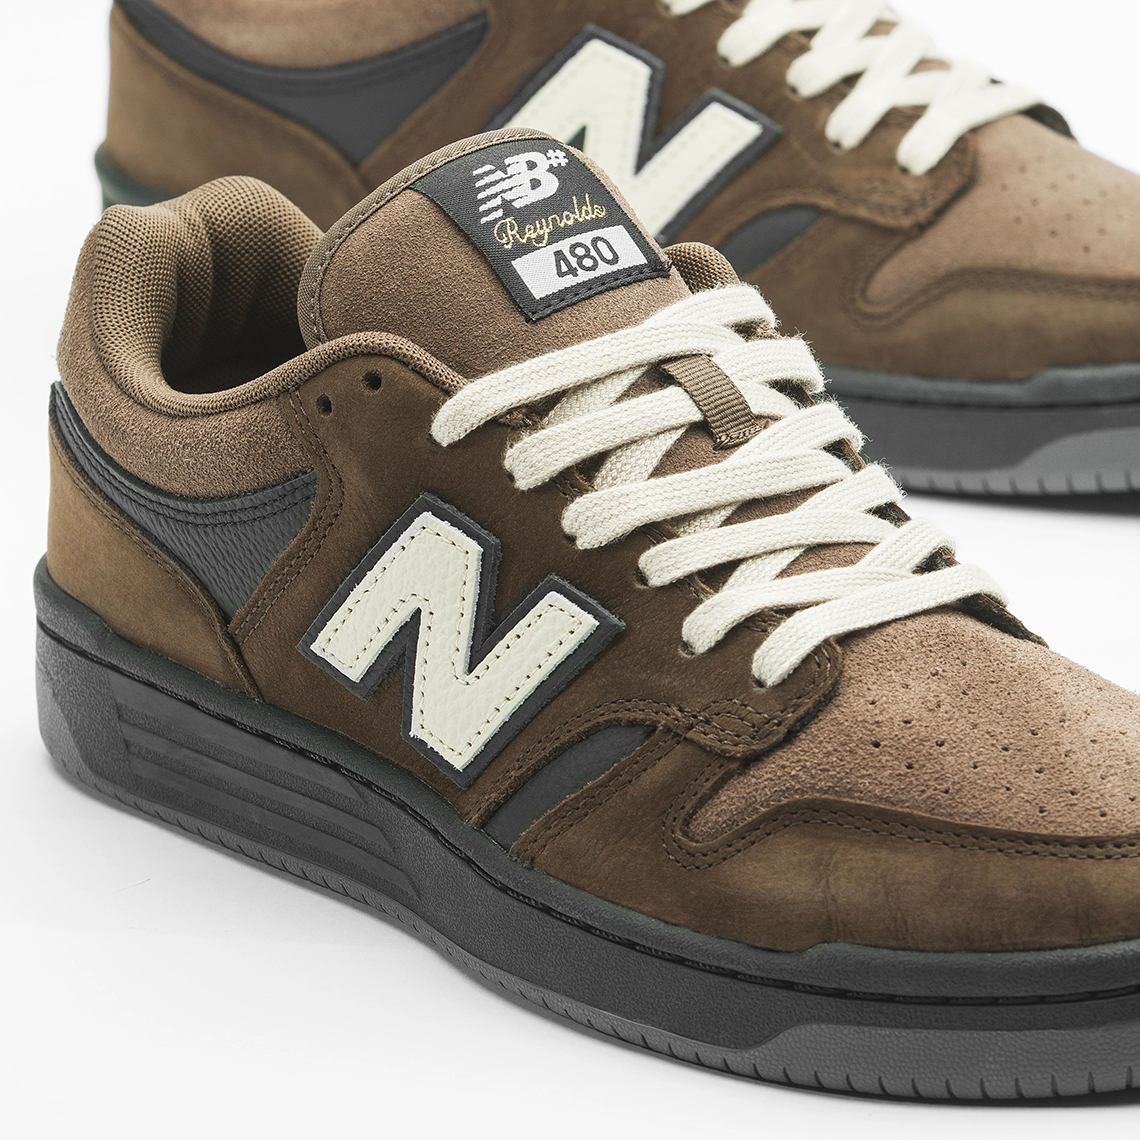 Andrew Reynolds New Balance Numeric 480BOS Release Date 2